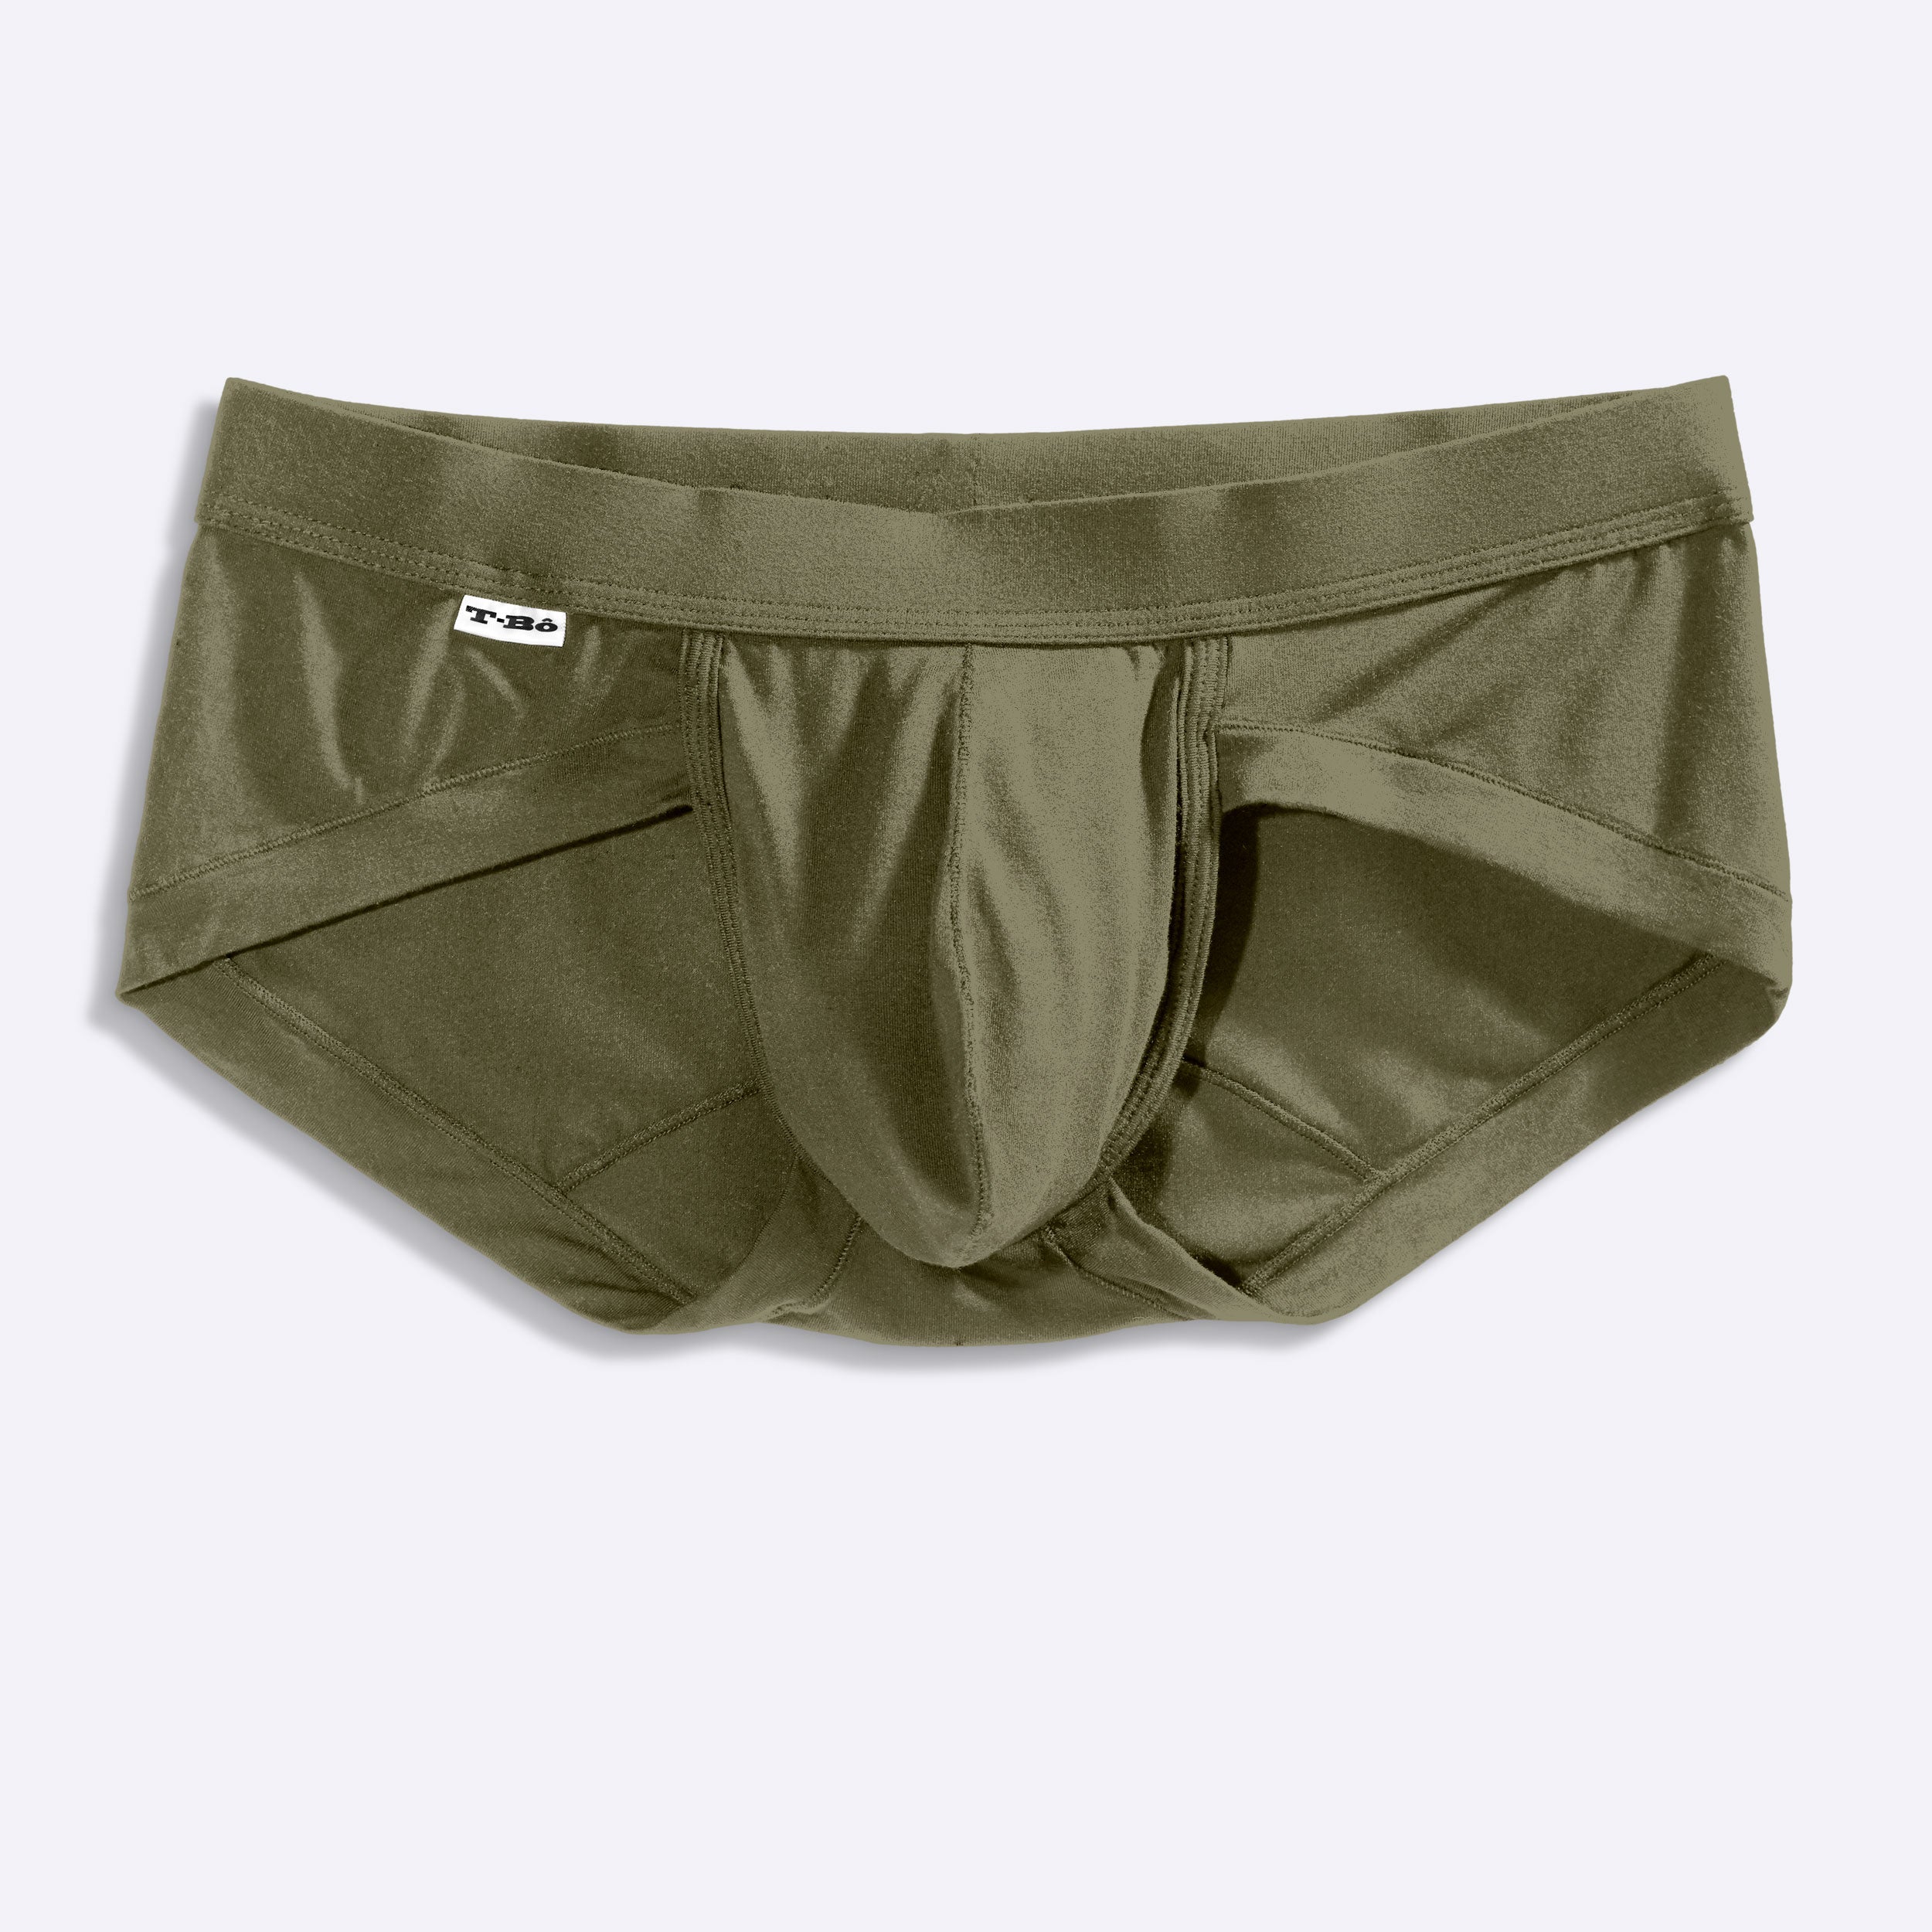 UNBOXING: TBô Earth Green Boxer Briefs 